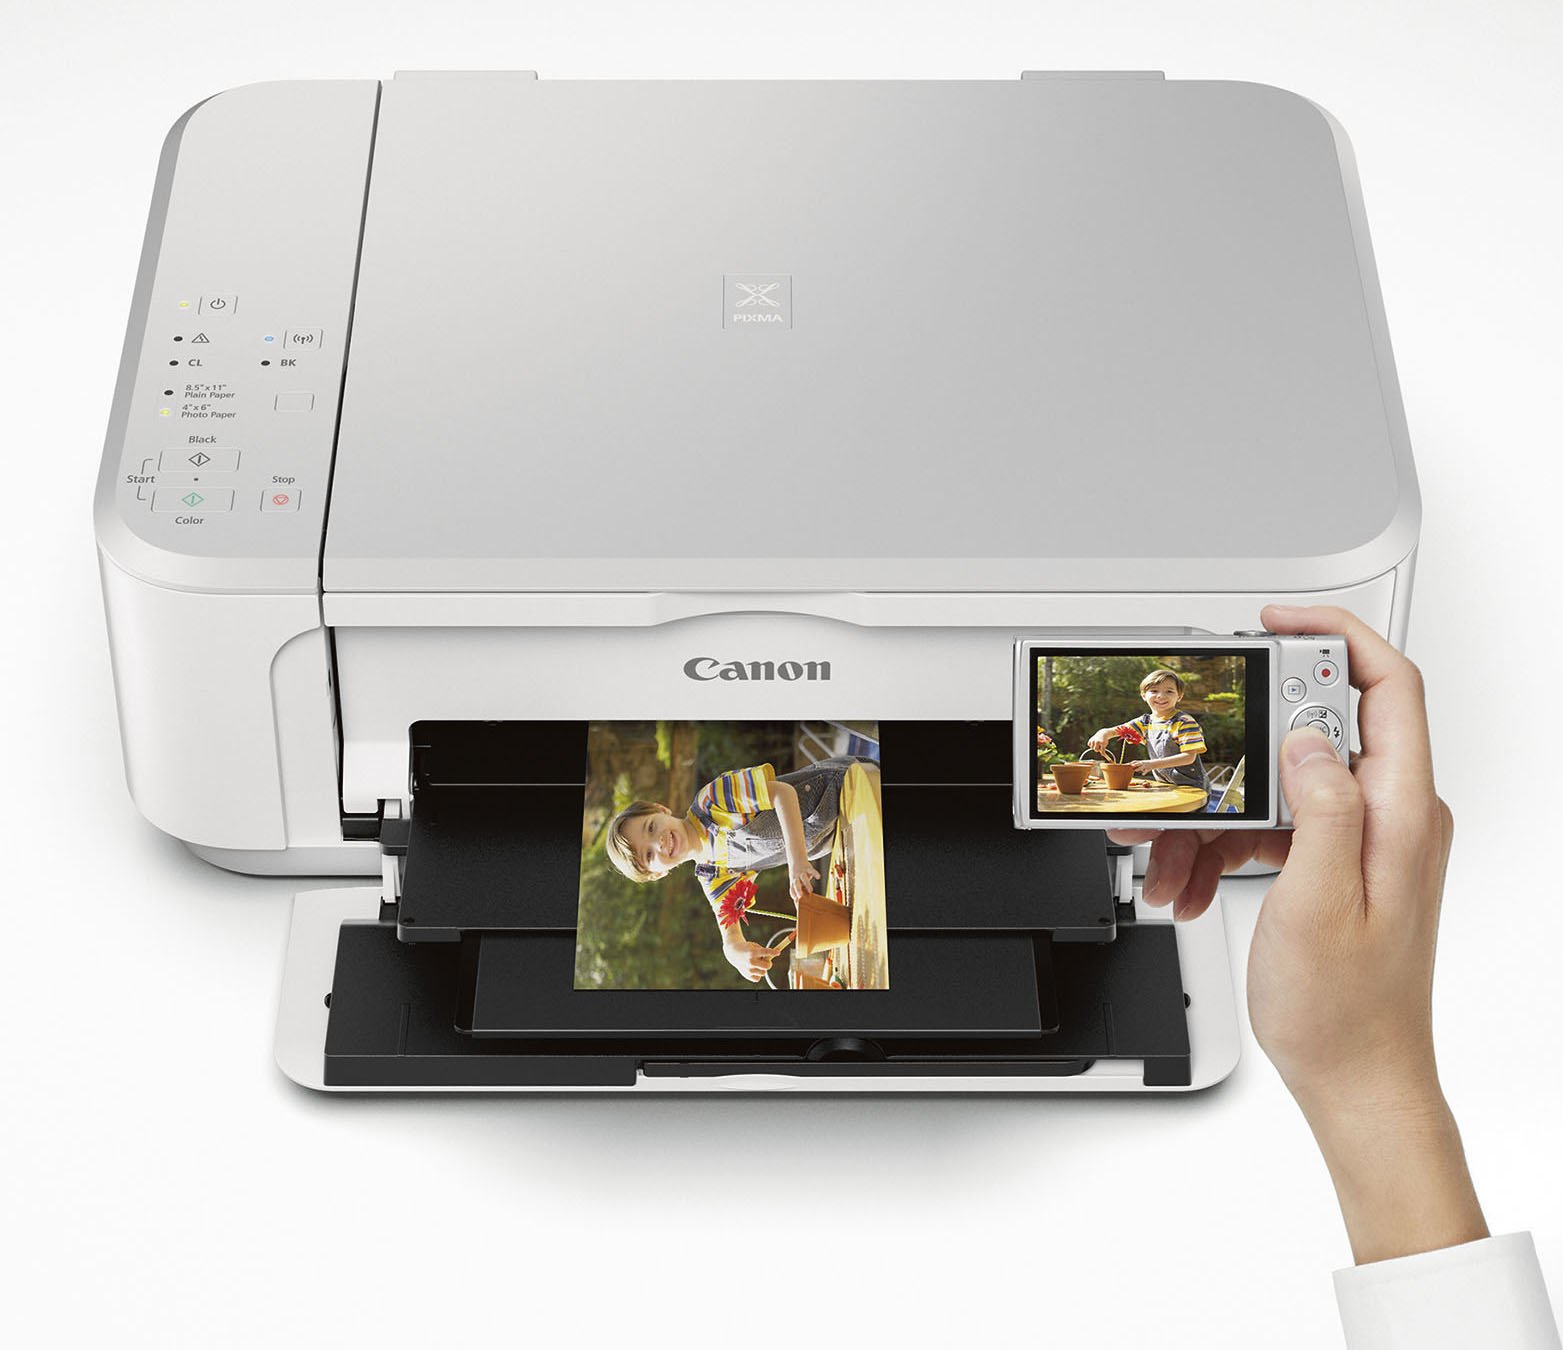 Canon PIXMA MG3620 Wireless All-in-One Color Inkjet Printer with Mobile and Tablet Printing, White